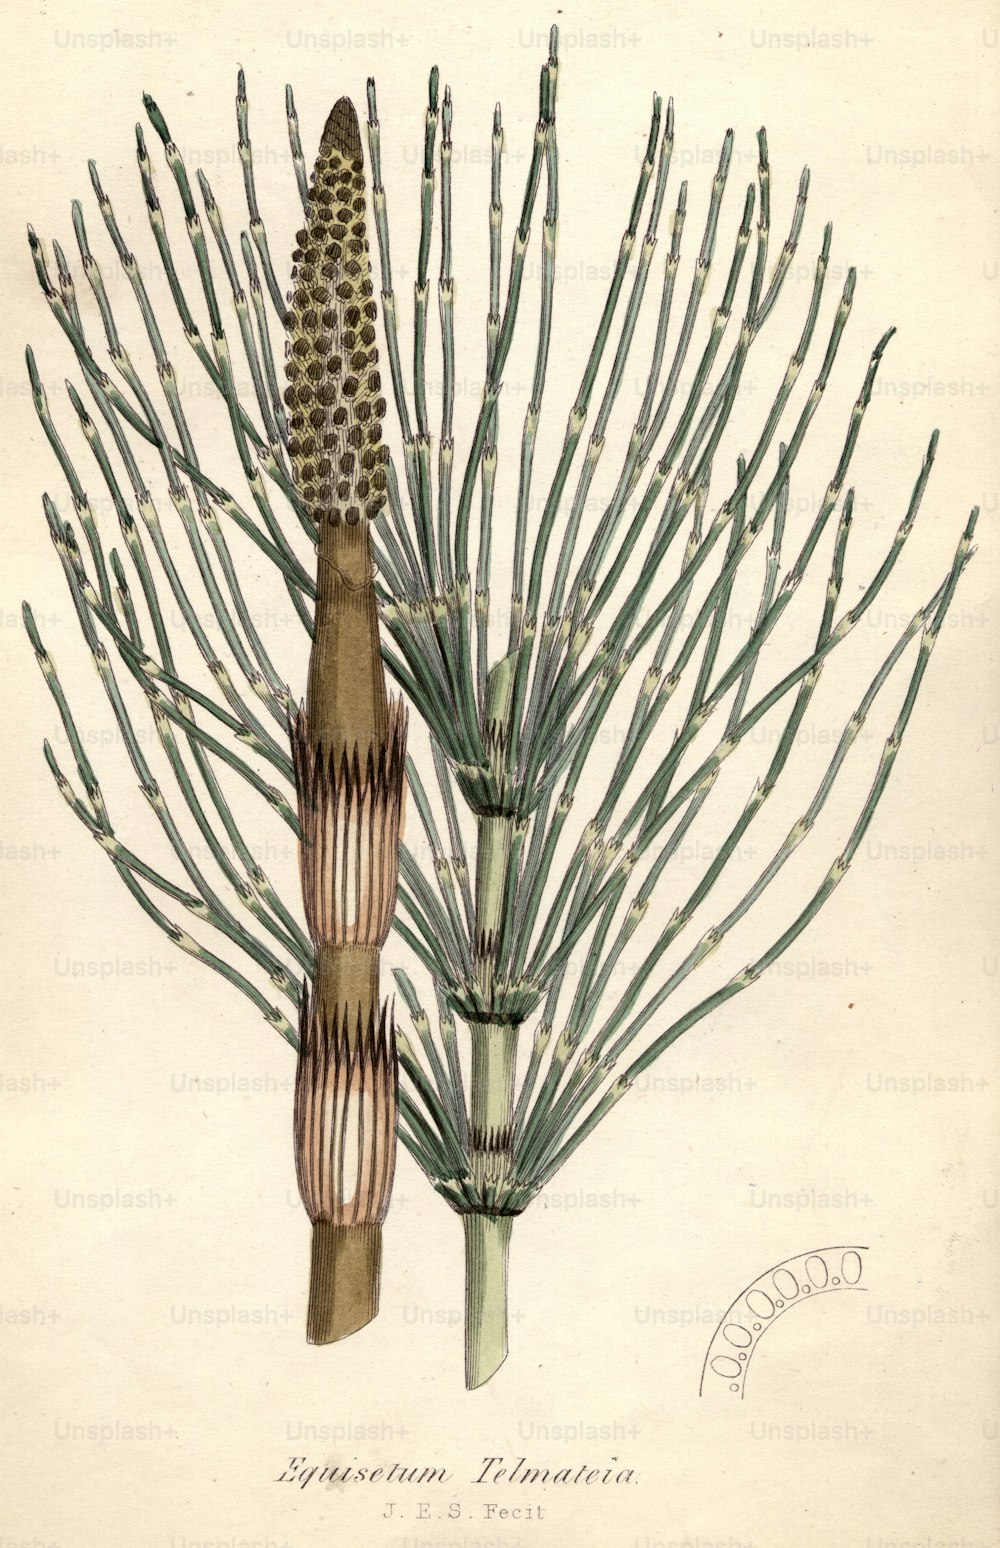 circa 1800:  Equisetum telmateia, or horse tail fern.  (Photo by Hulton Archive/Getty Images)